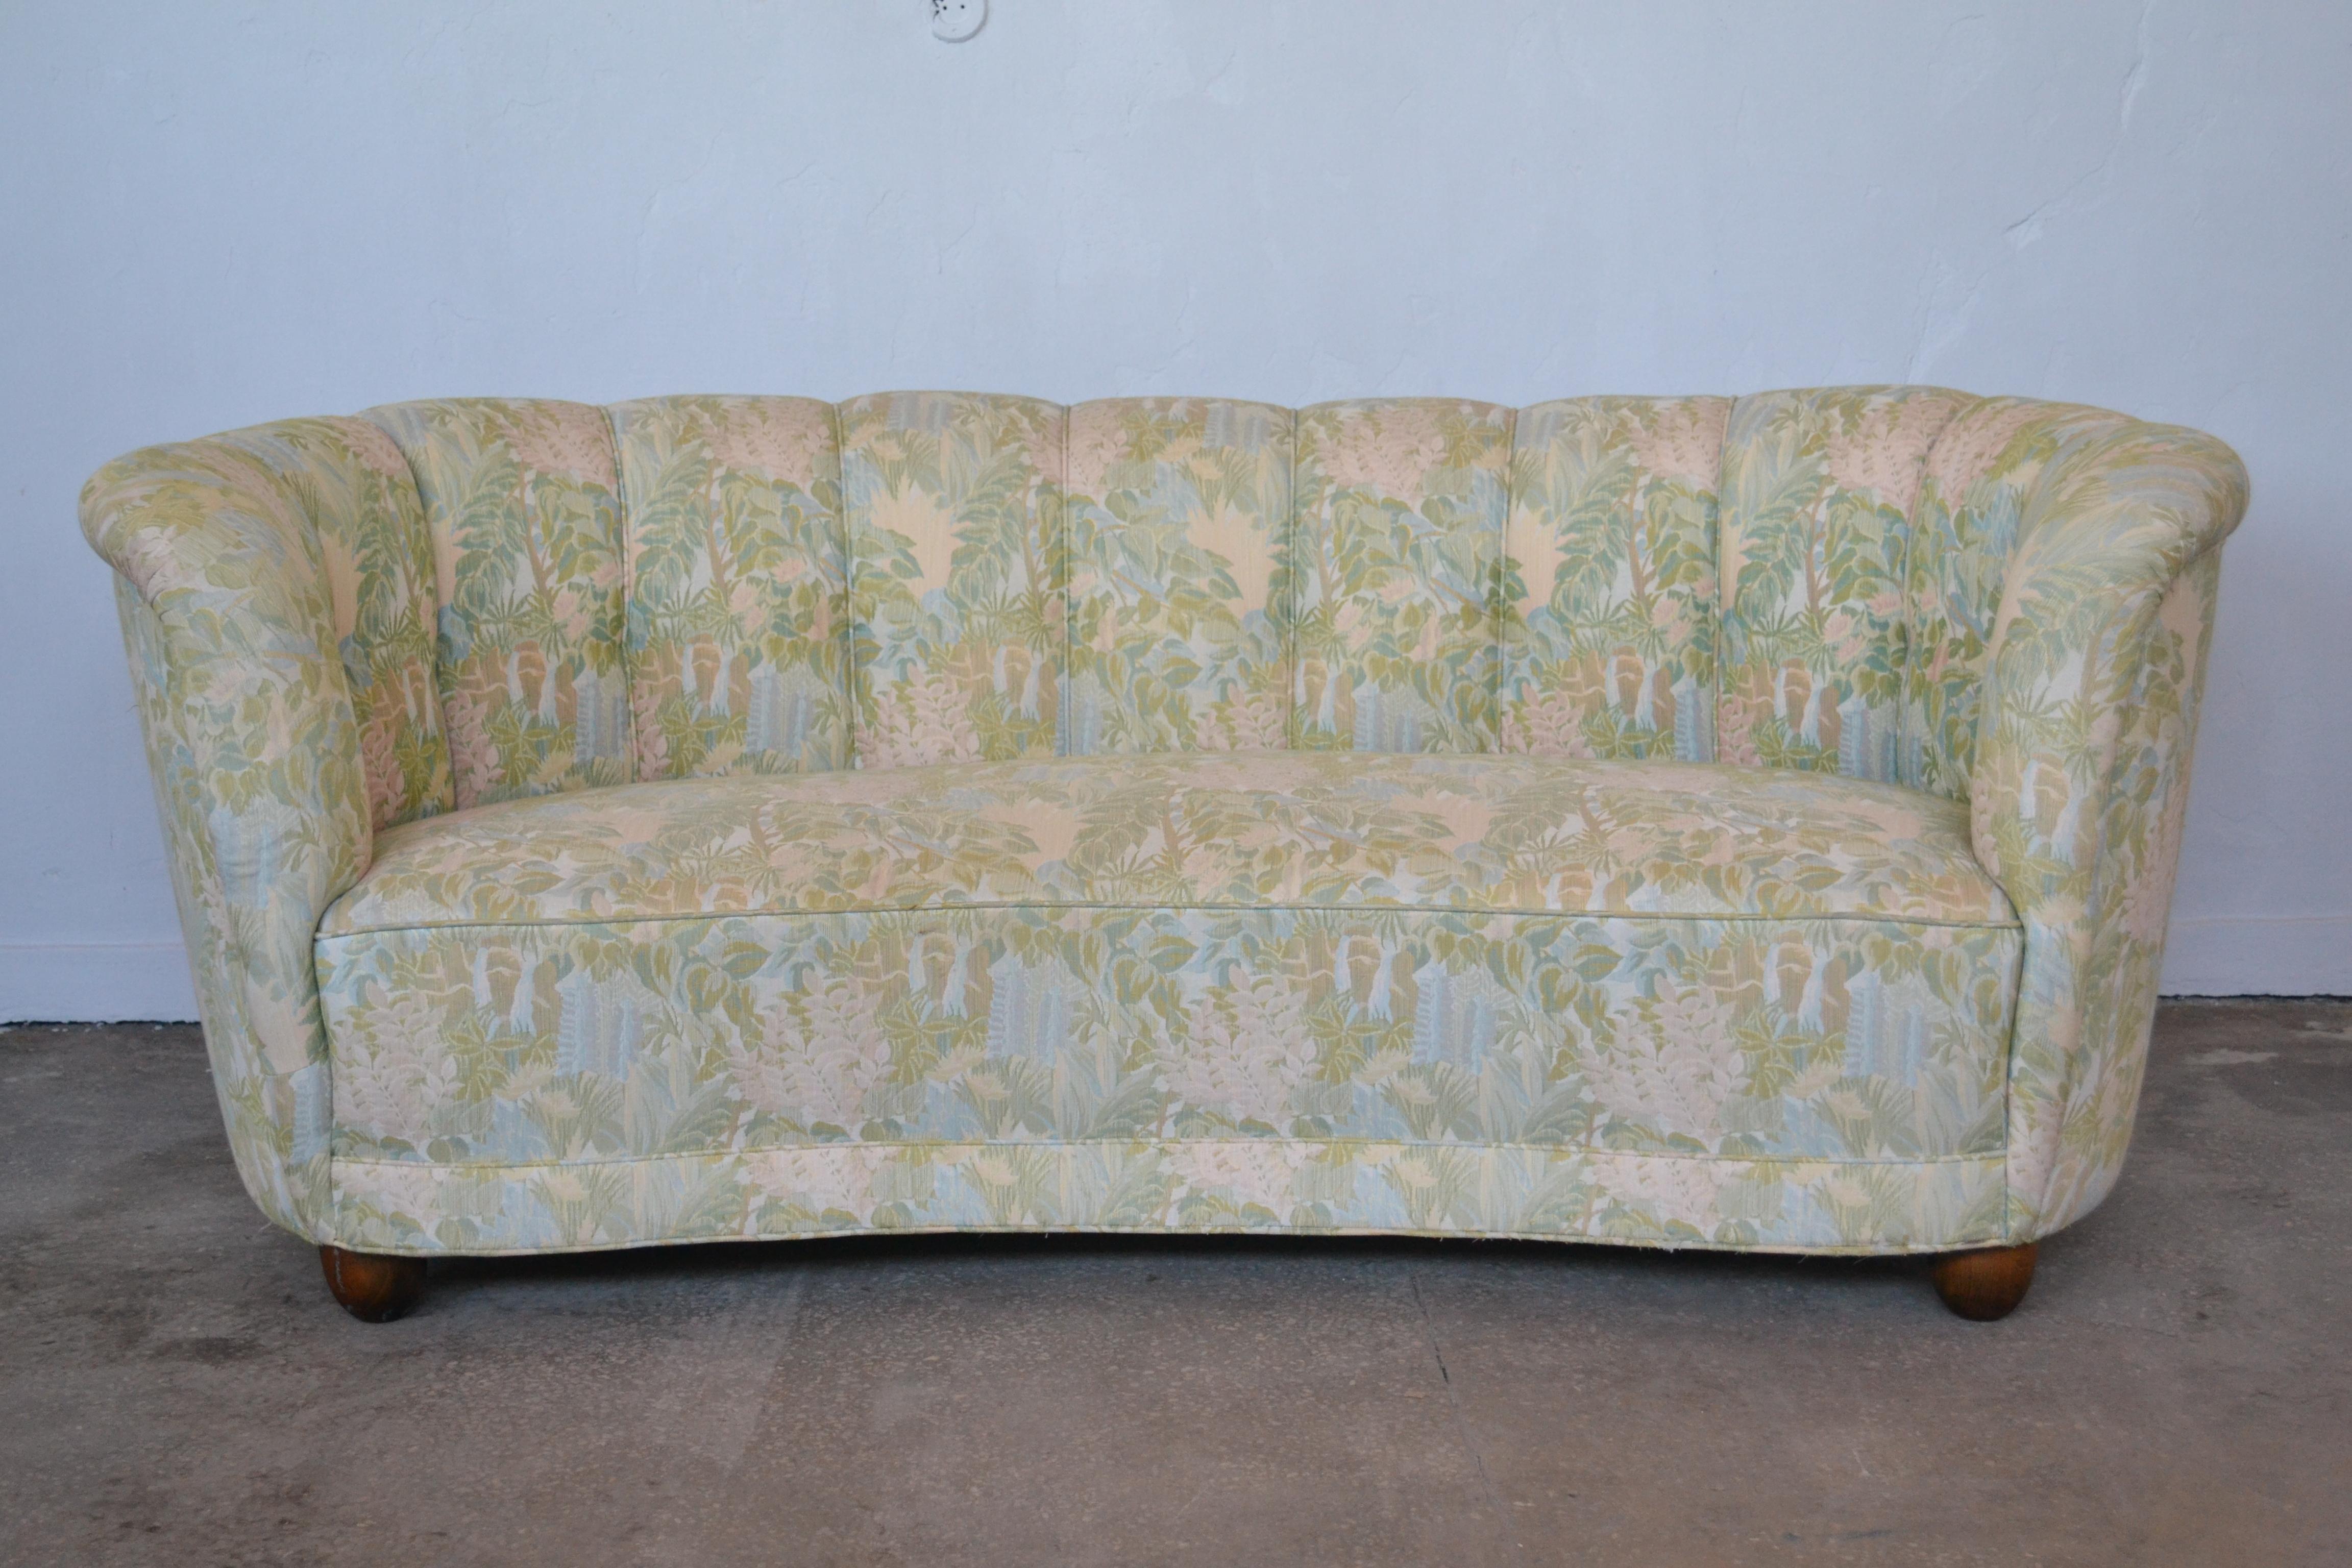 This Danish sofa from the 1940s remains in original condition throughout.